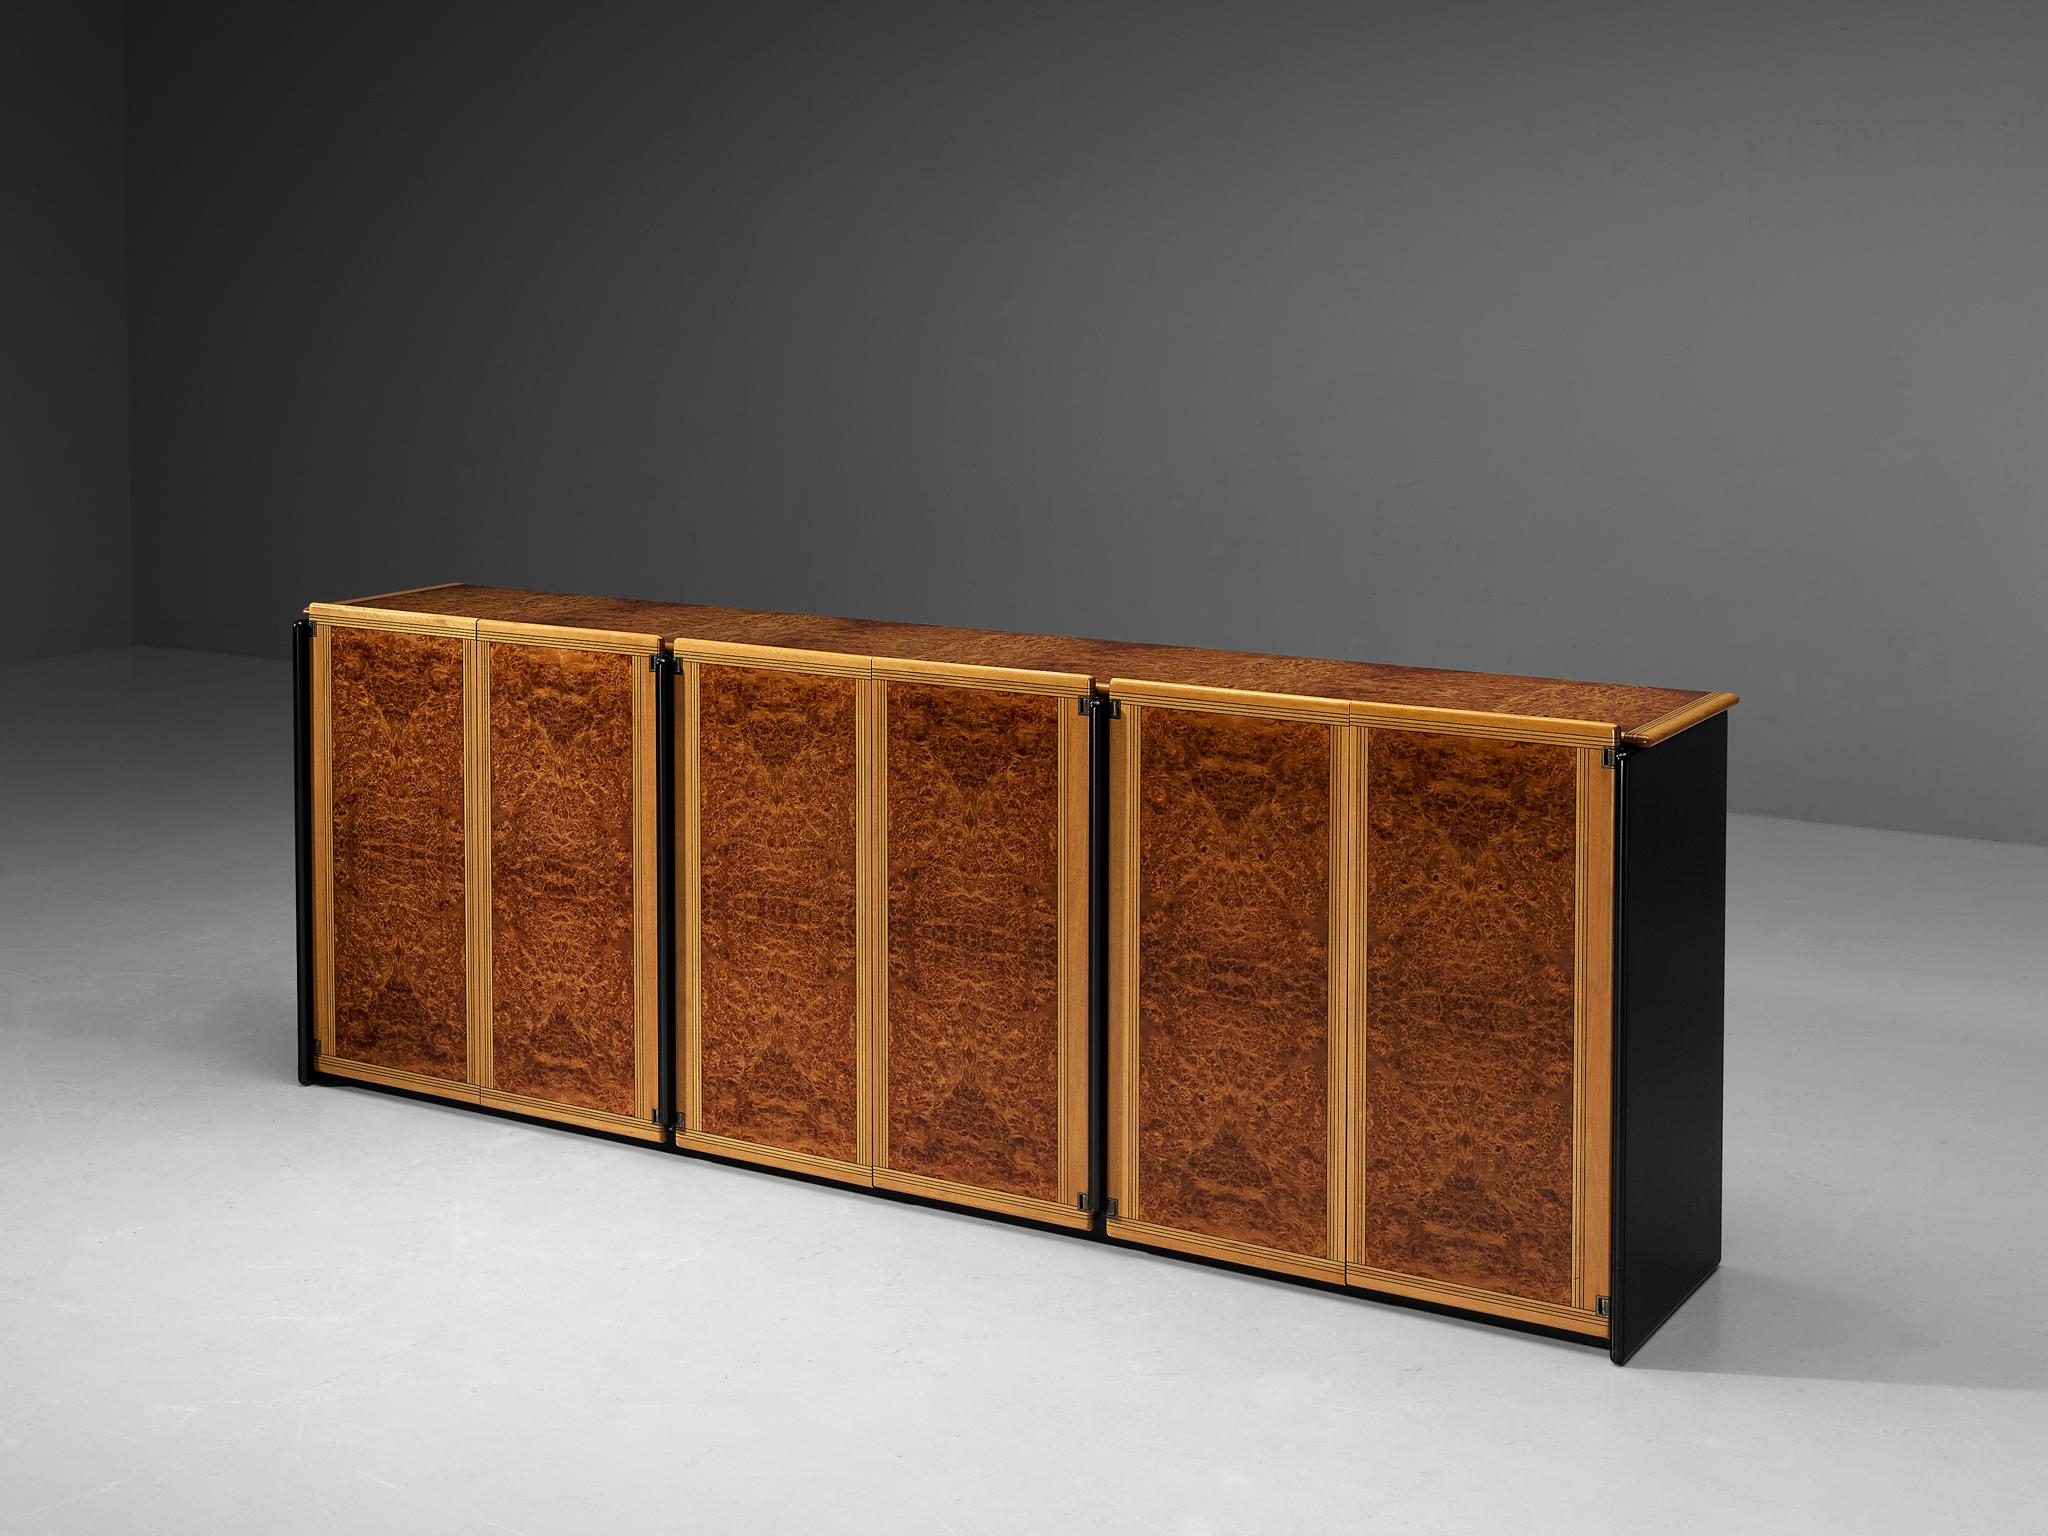 Afra & Tobia Scarpa for Maxalto, sideboard, mahogany, mahogany burl, Italy, circa 1975.

This sideboard with strong geometrical lines is designed as part of the ‘Artona’ line by Afra & Tobia Scarpa. The six front panels as well as the top are